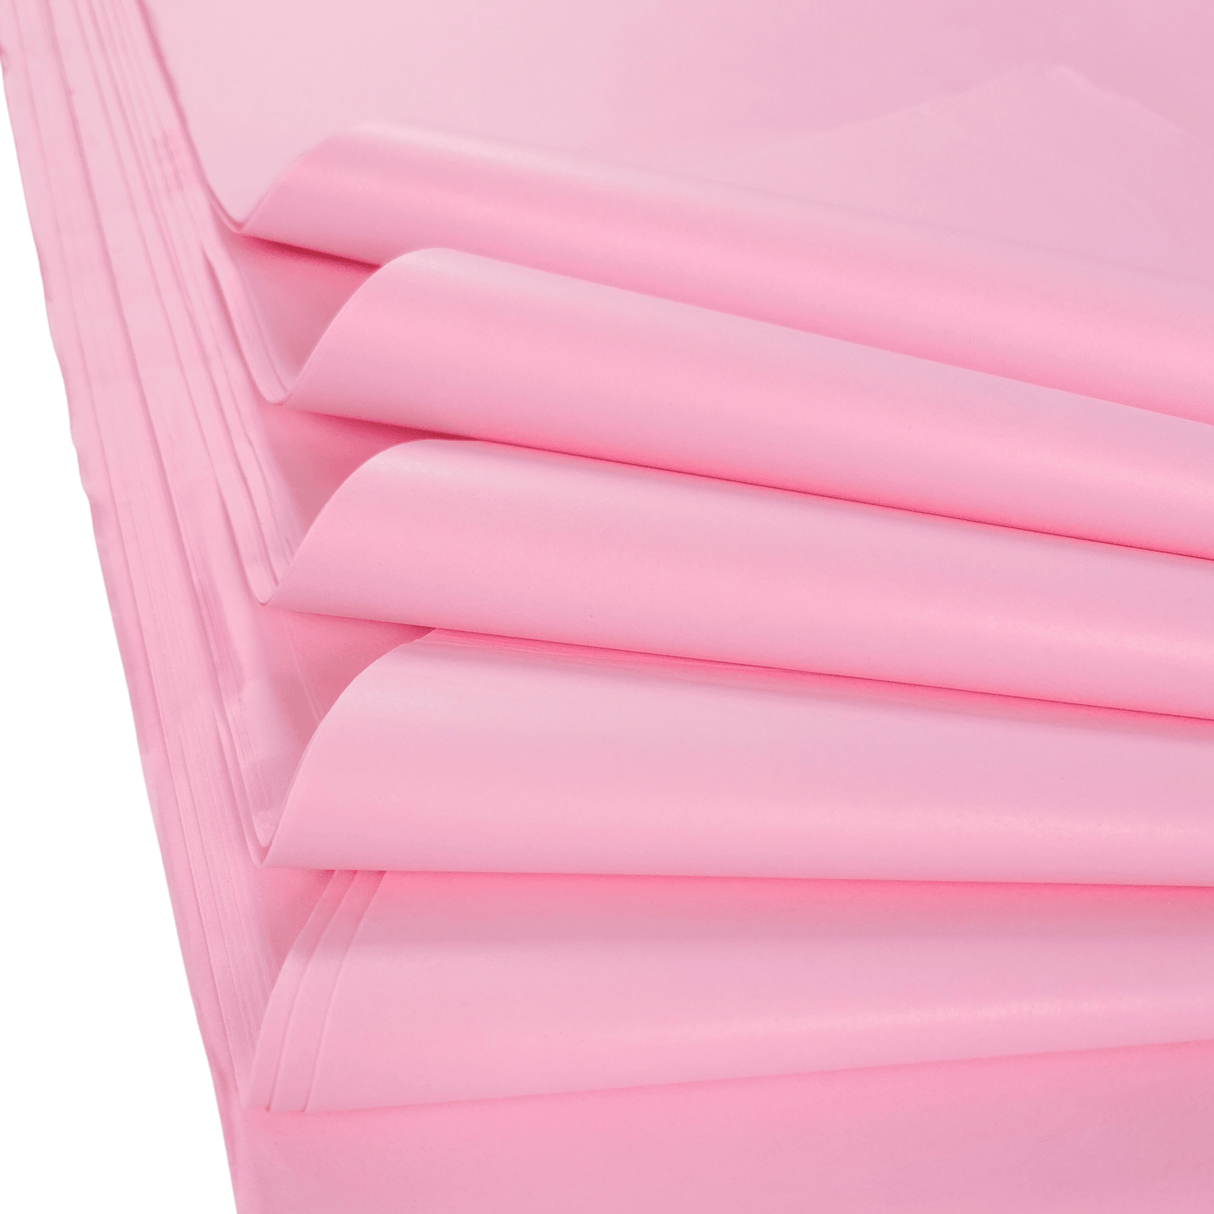 Pink Tissue Paper Folds 3